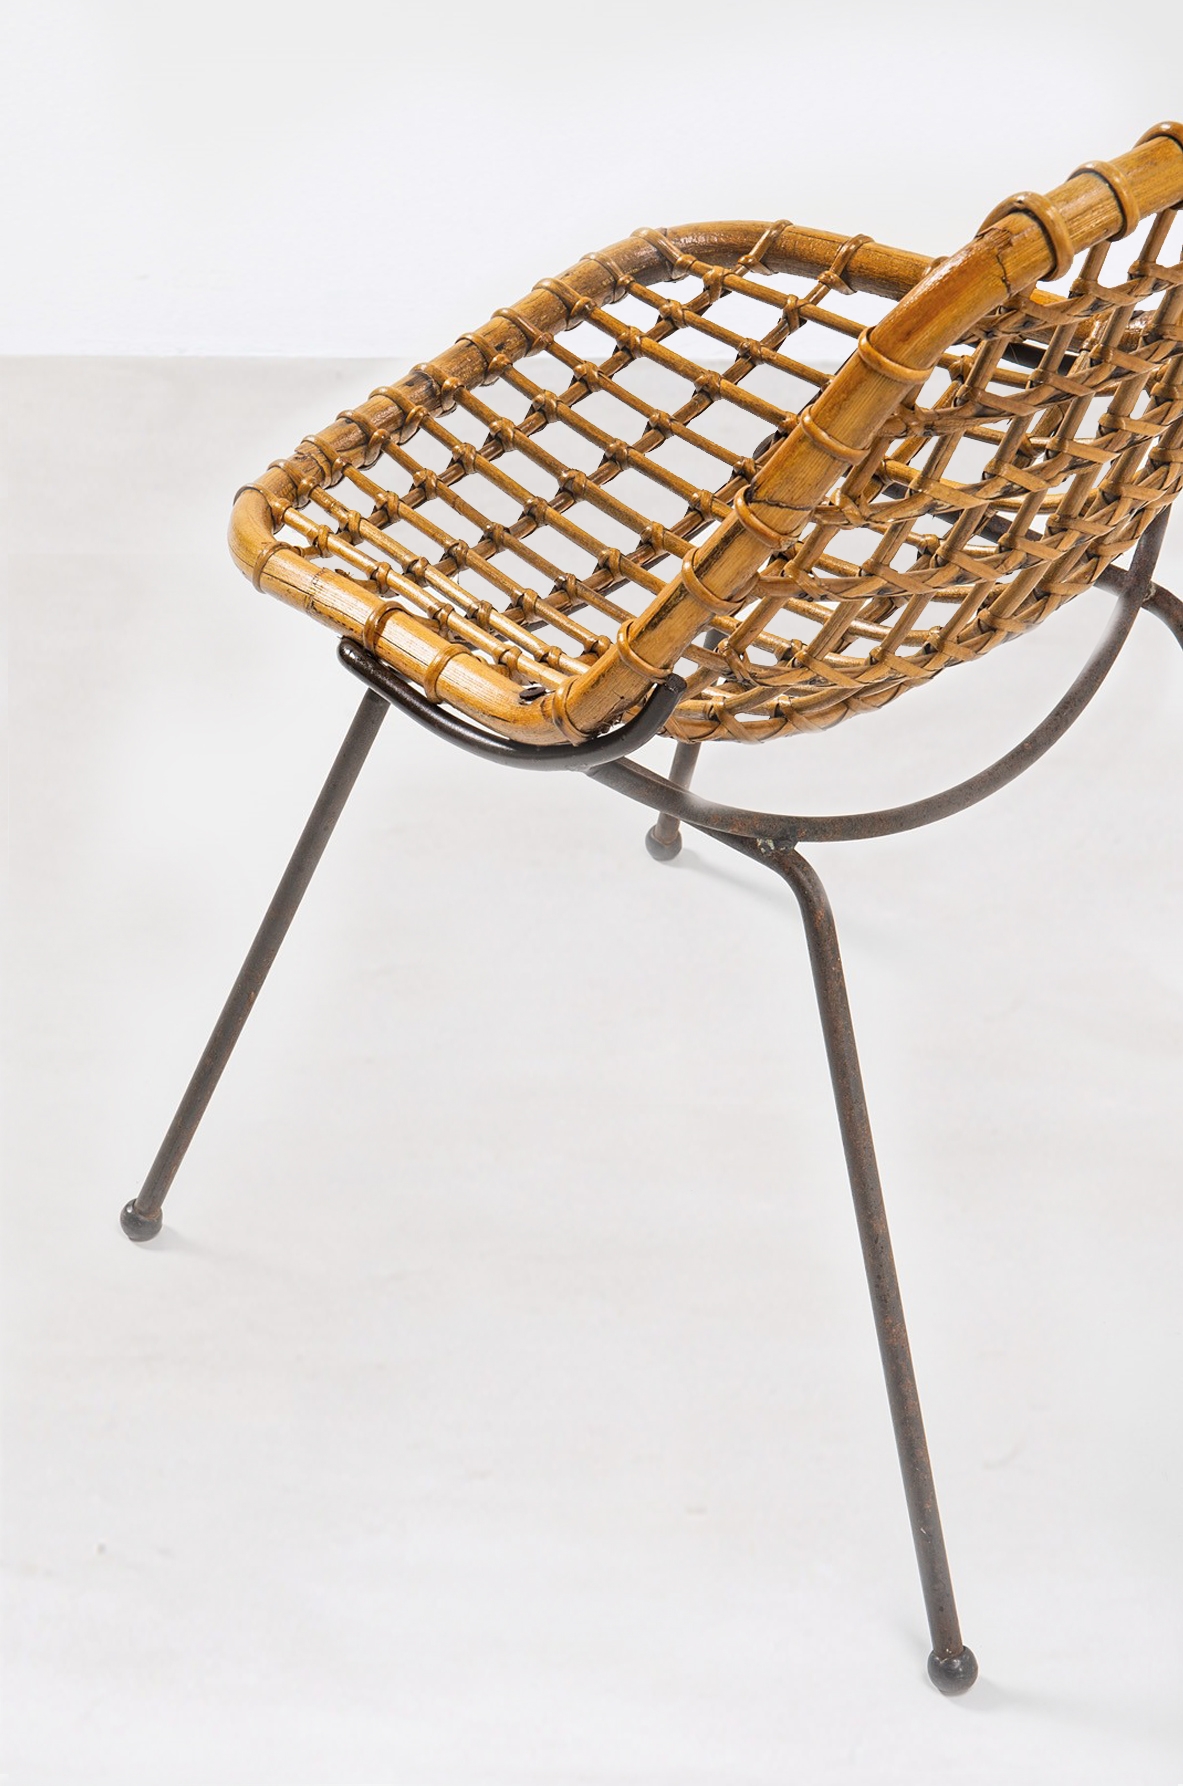 Gian Franco Leger. Set of 8 curved rattan chairs with iron rod structure, 1960's